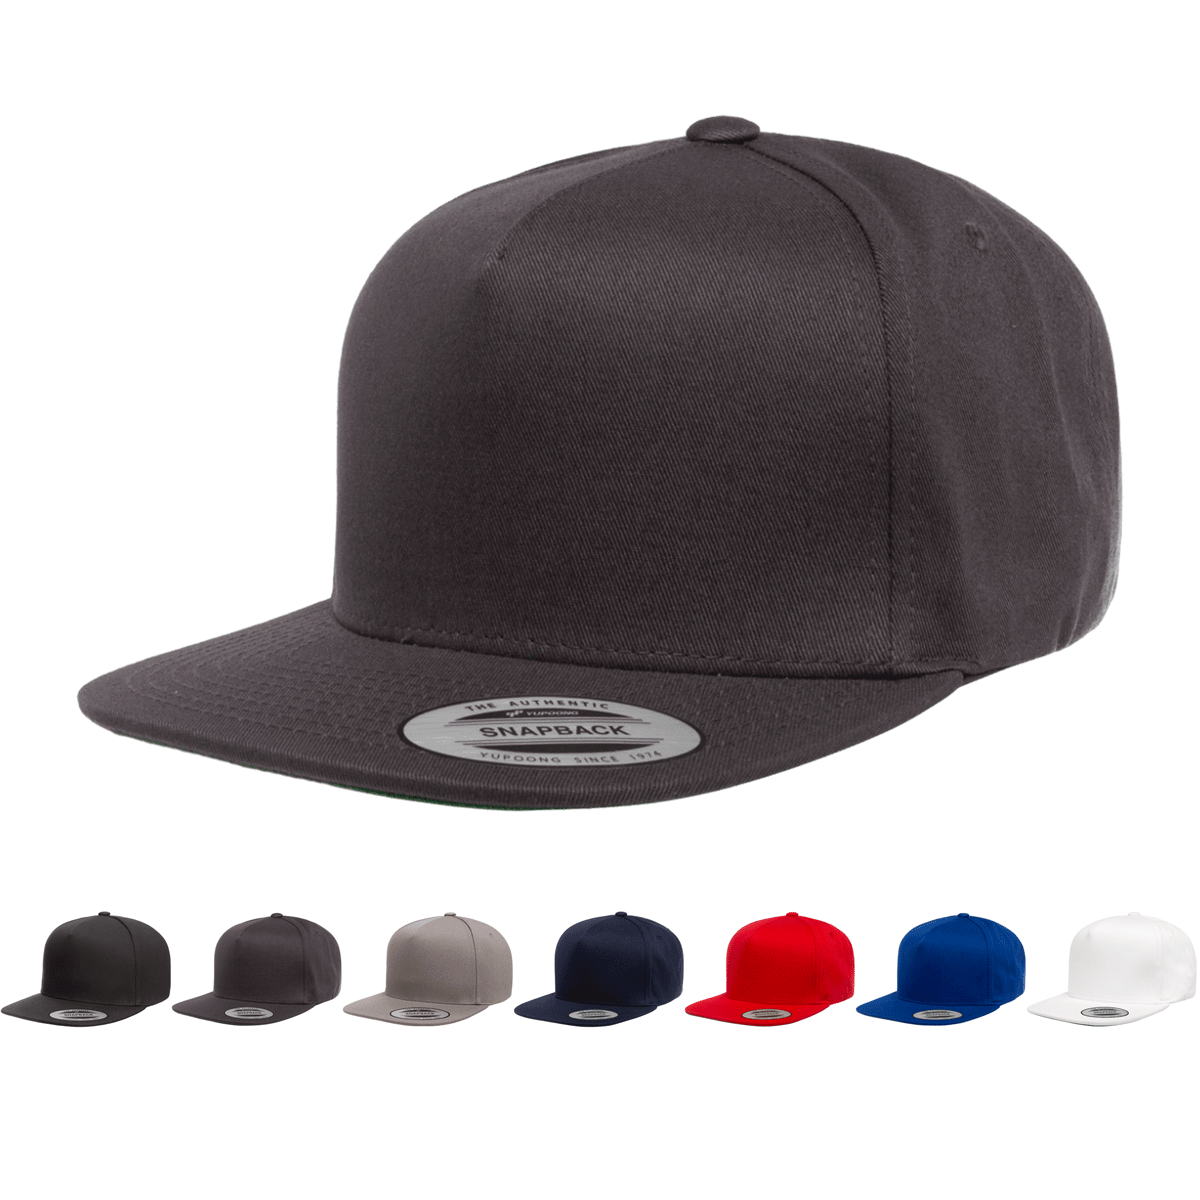 Yupoong 6007 – Bill Flat The Snapback YP Park Cla Cap 5-Panel Hat, Wholesale Cotton - Twill